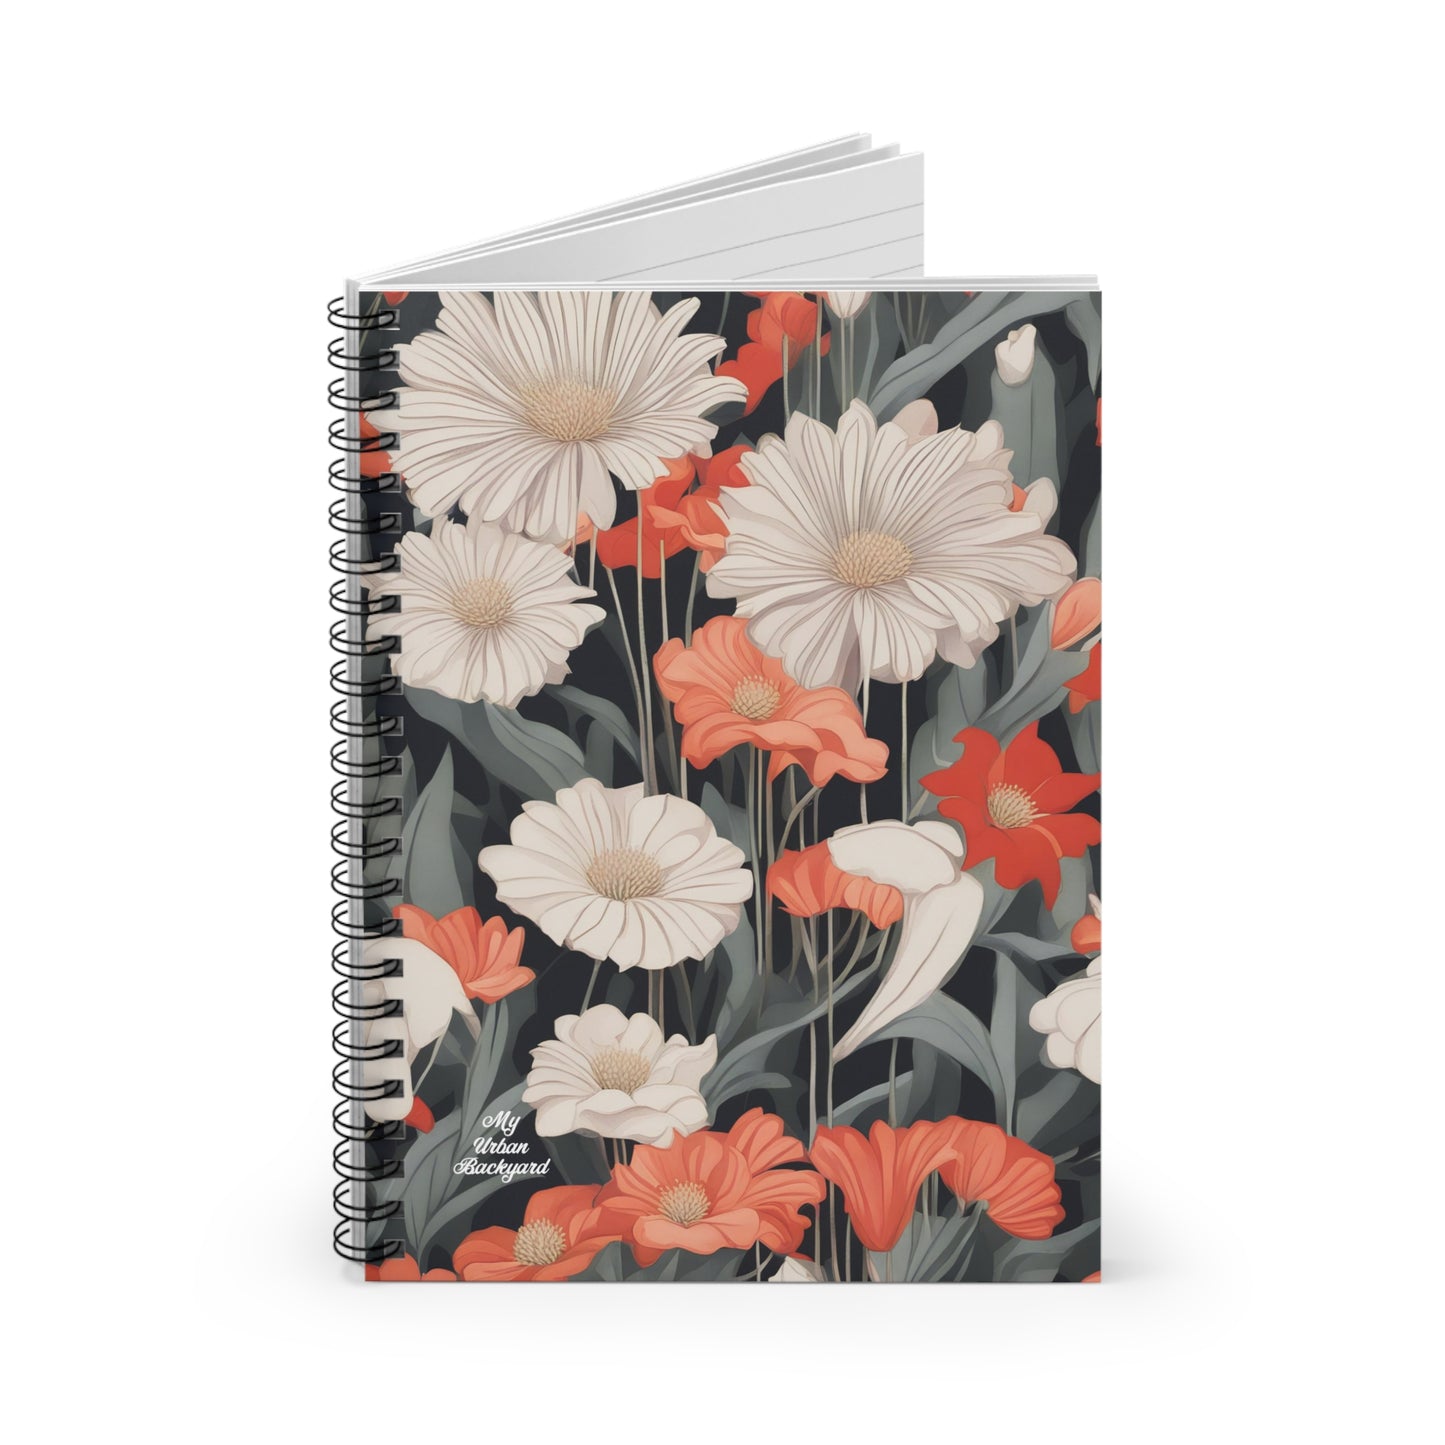 Art Deco Flowers, Spiral Notebook Journal - Write in Style